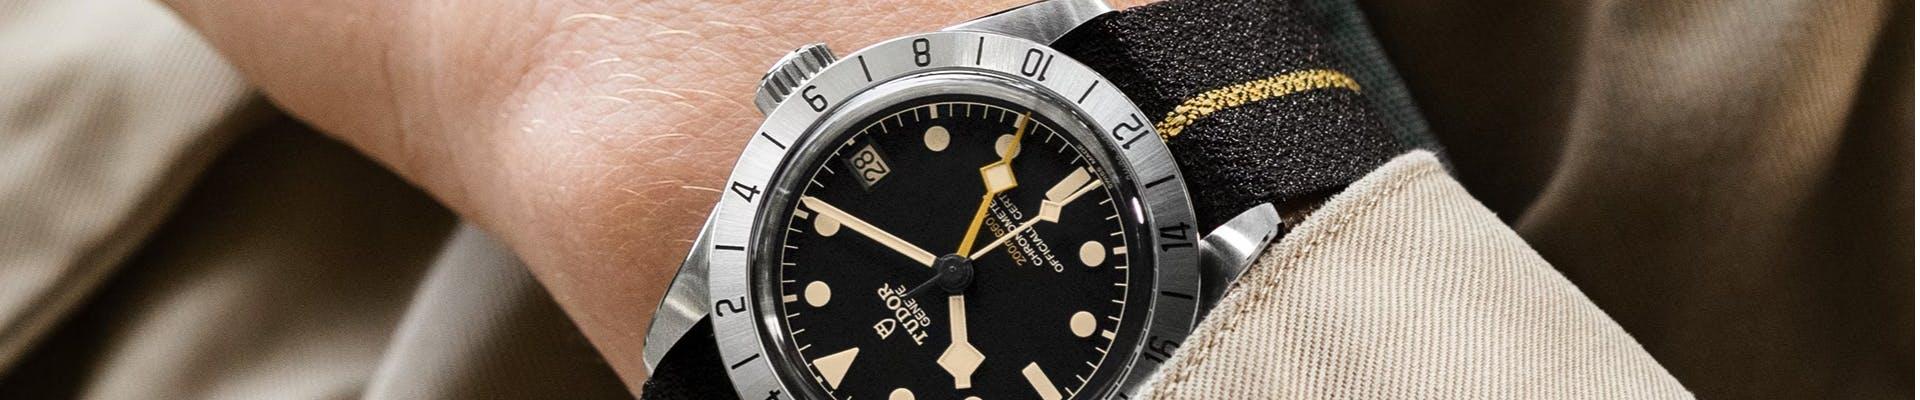 tudor mens black bay pro watch at lee michaels jewelry store